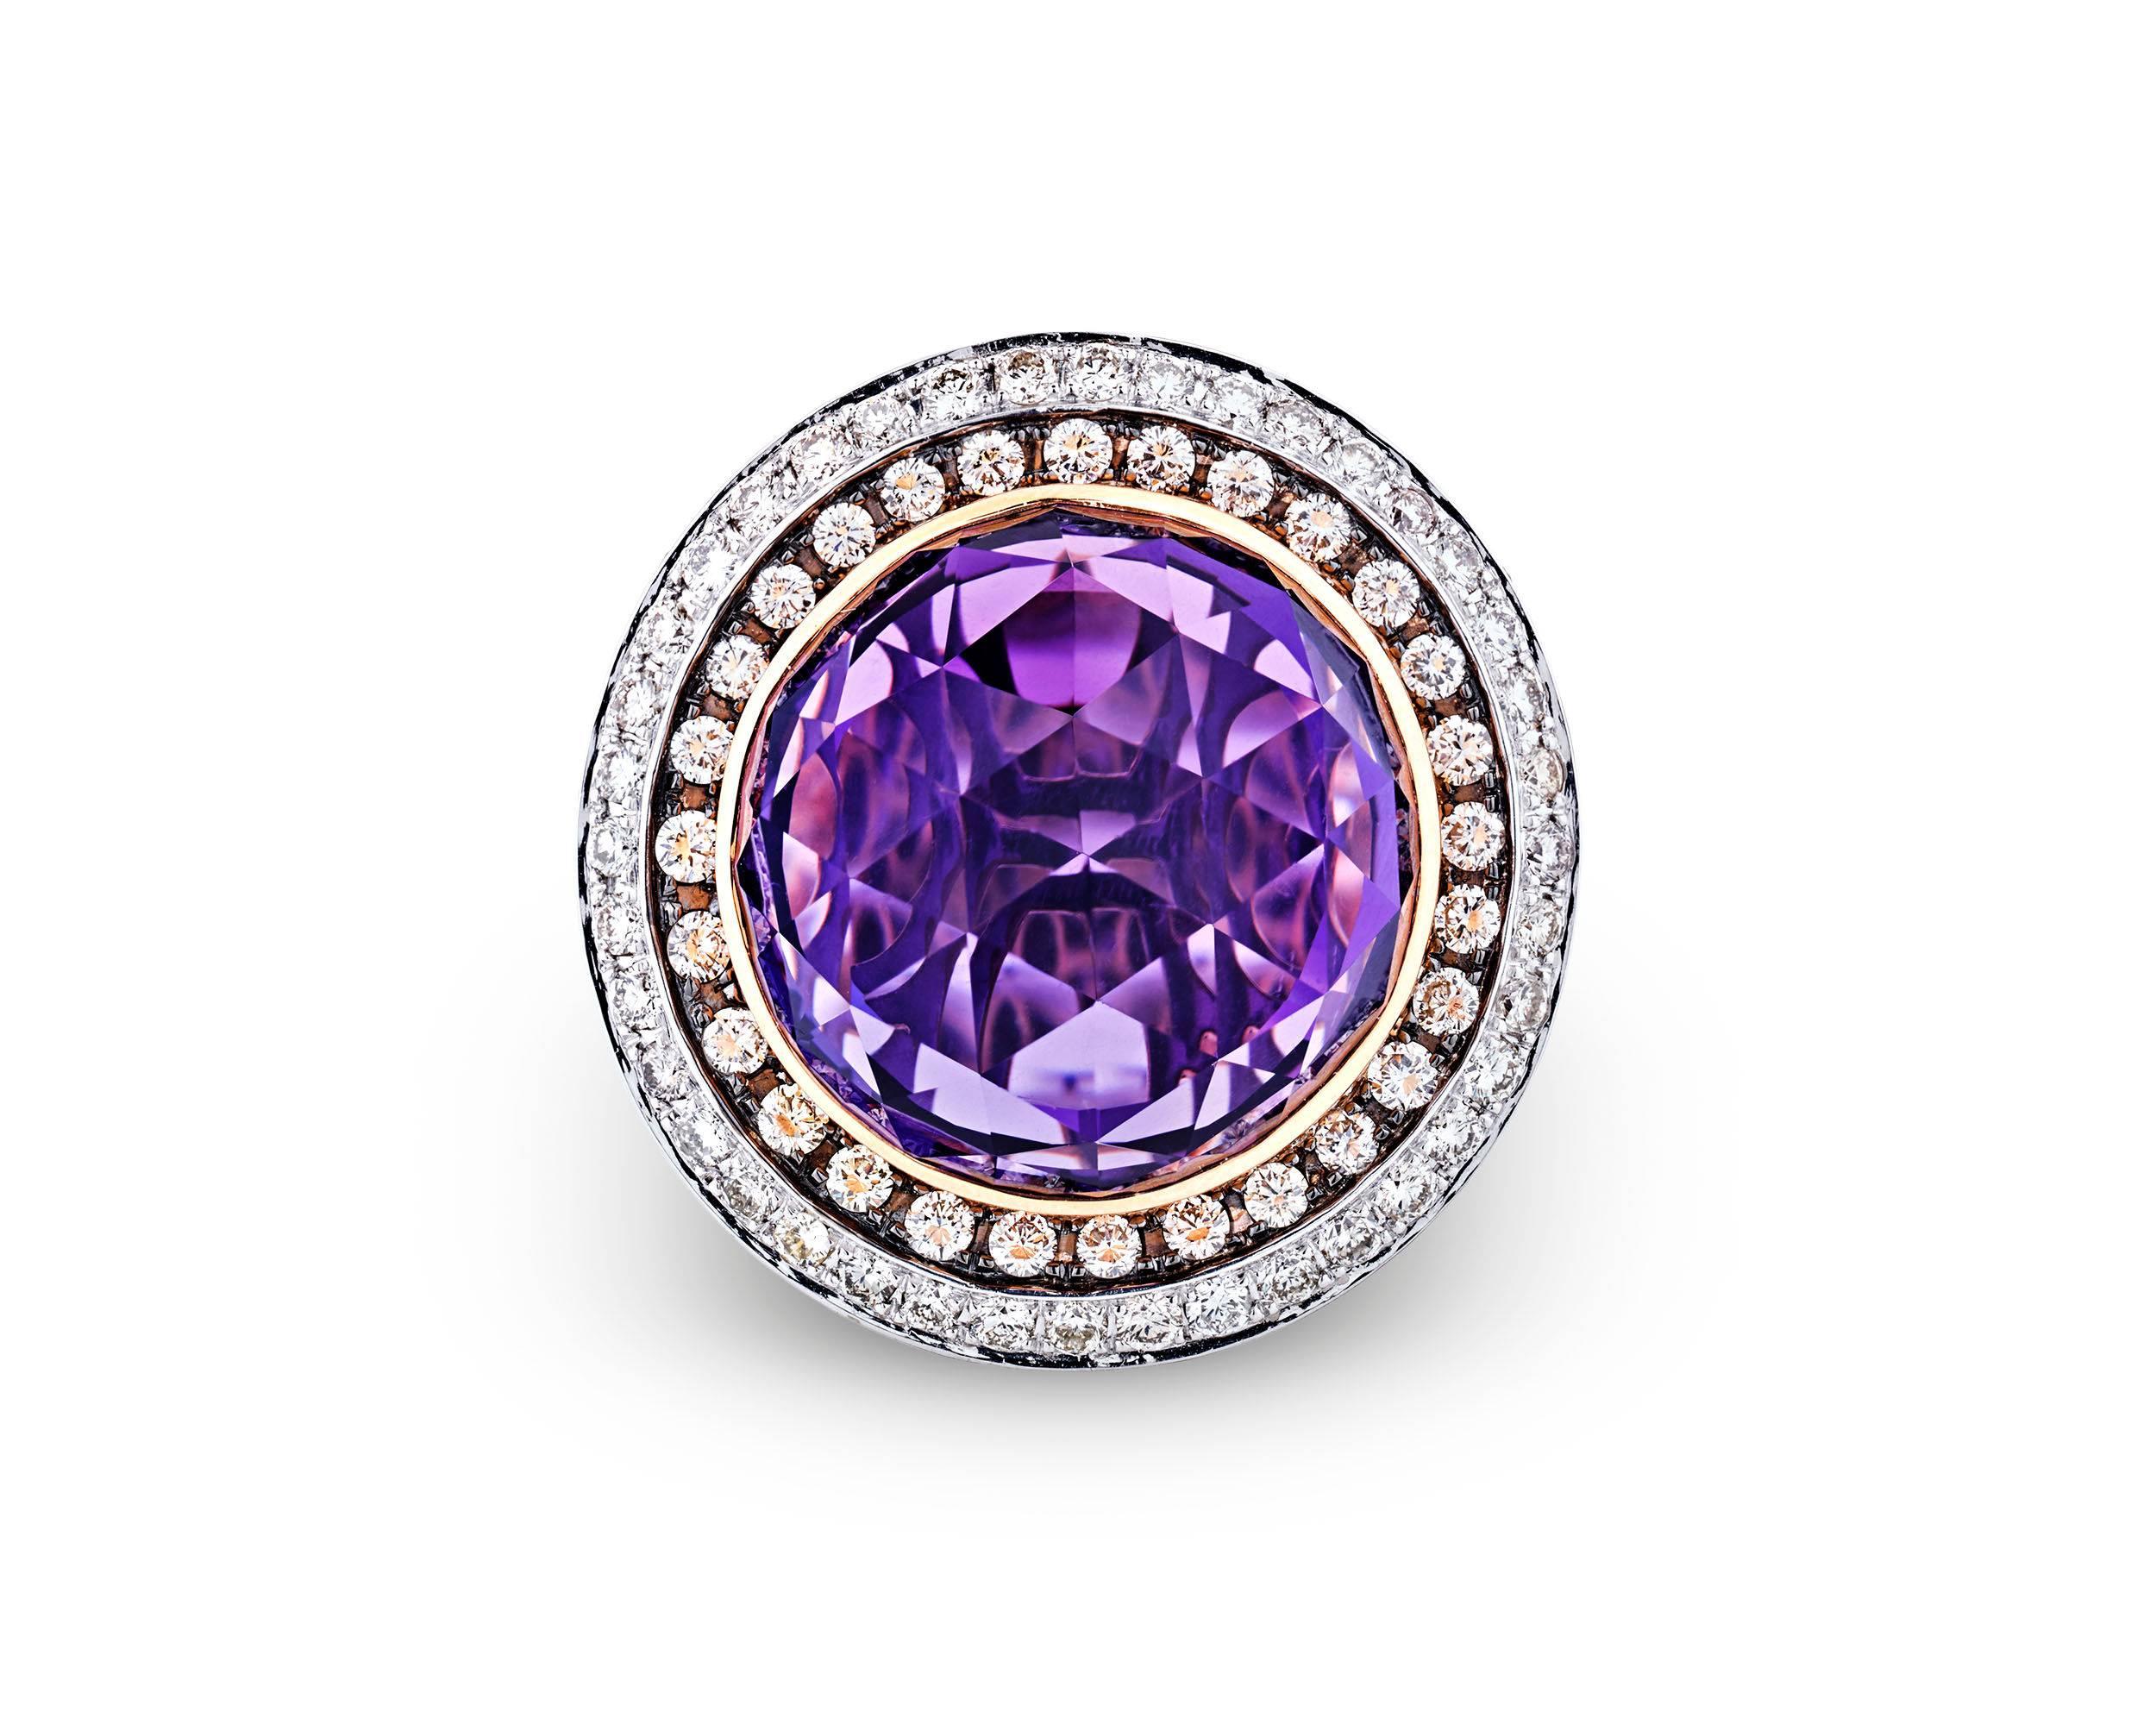 A mesmerizing amethyst weighing approximately 38.84 carats is the star of this spectacular cocktail ring. Beautifully cut to accentuate its stunning purplish pink hue, this monumental jewel is surrounded by a sea of glistening colored diamonds.